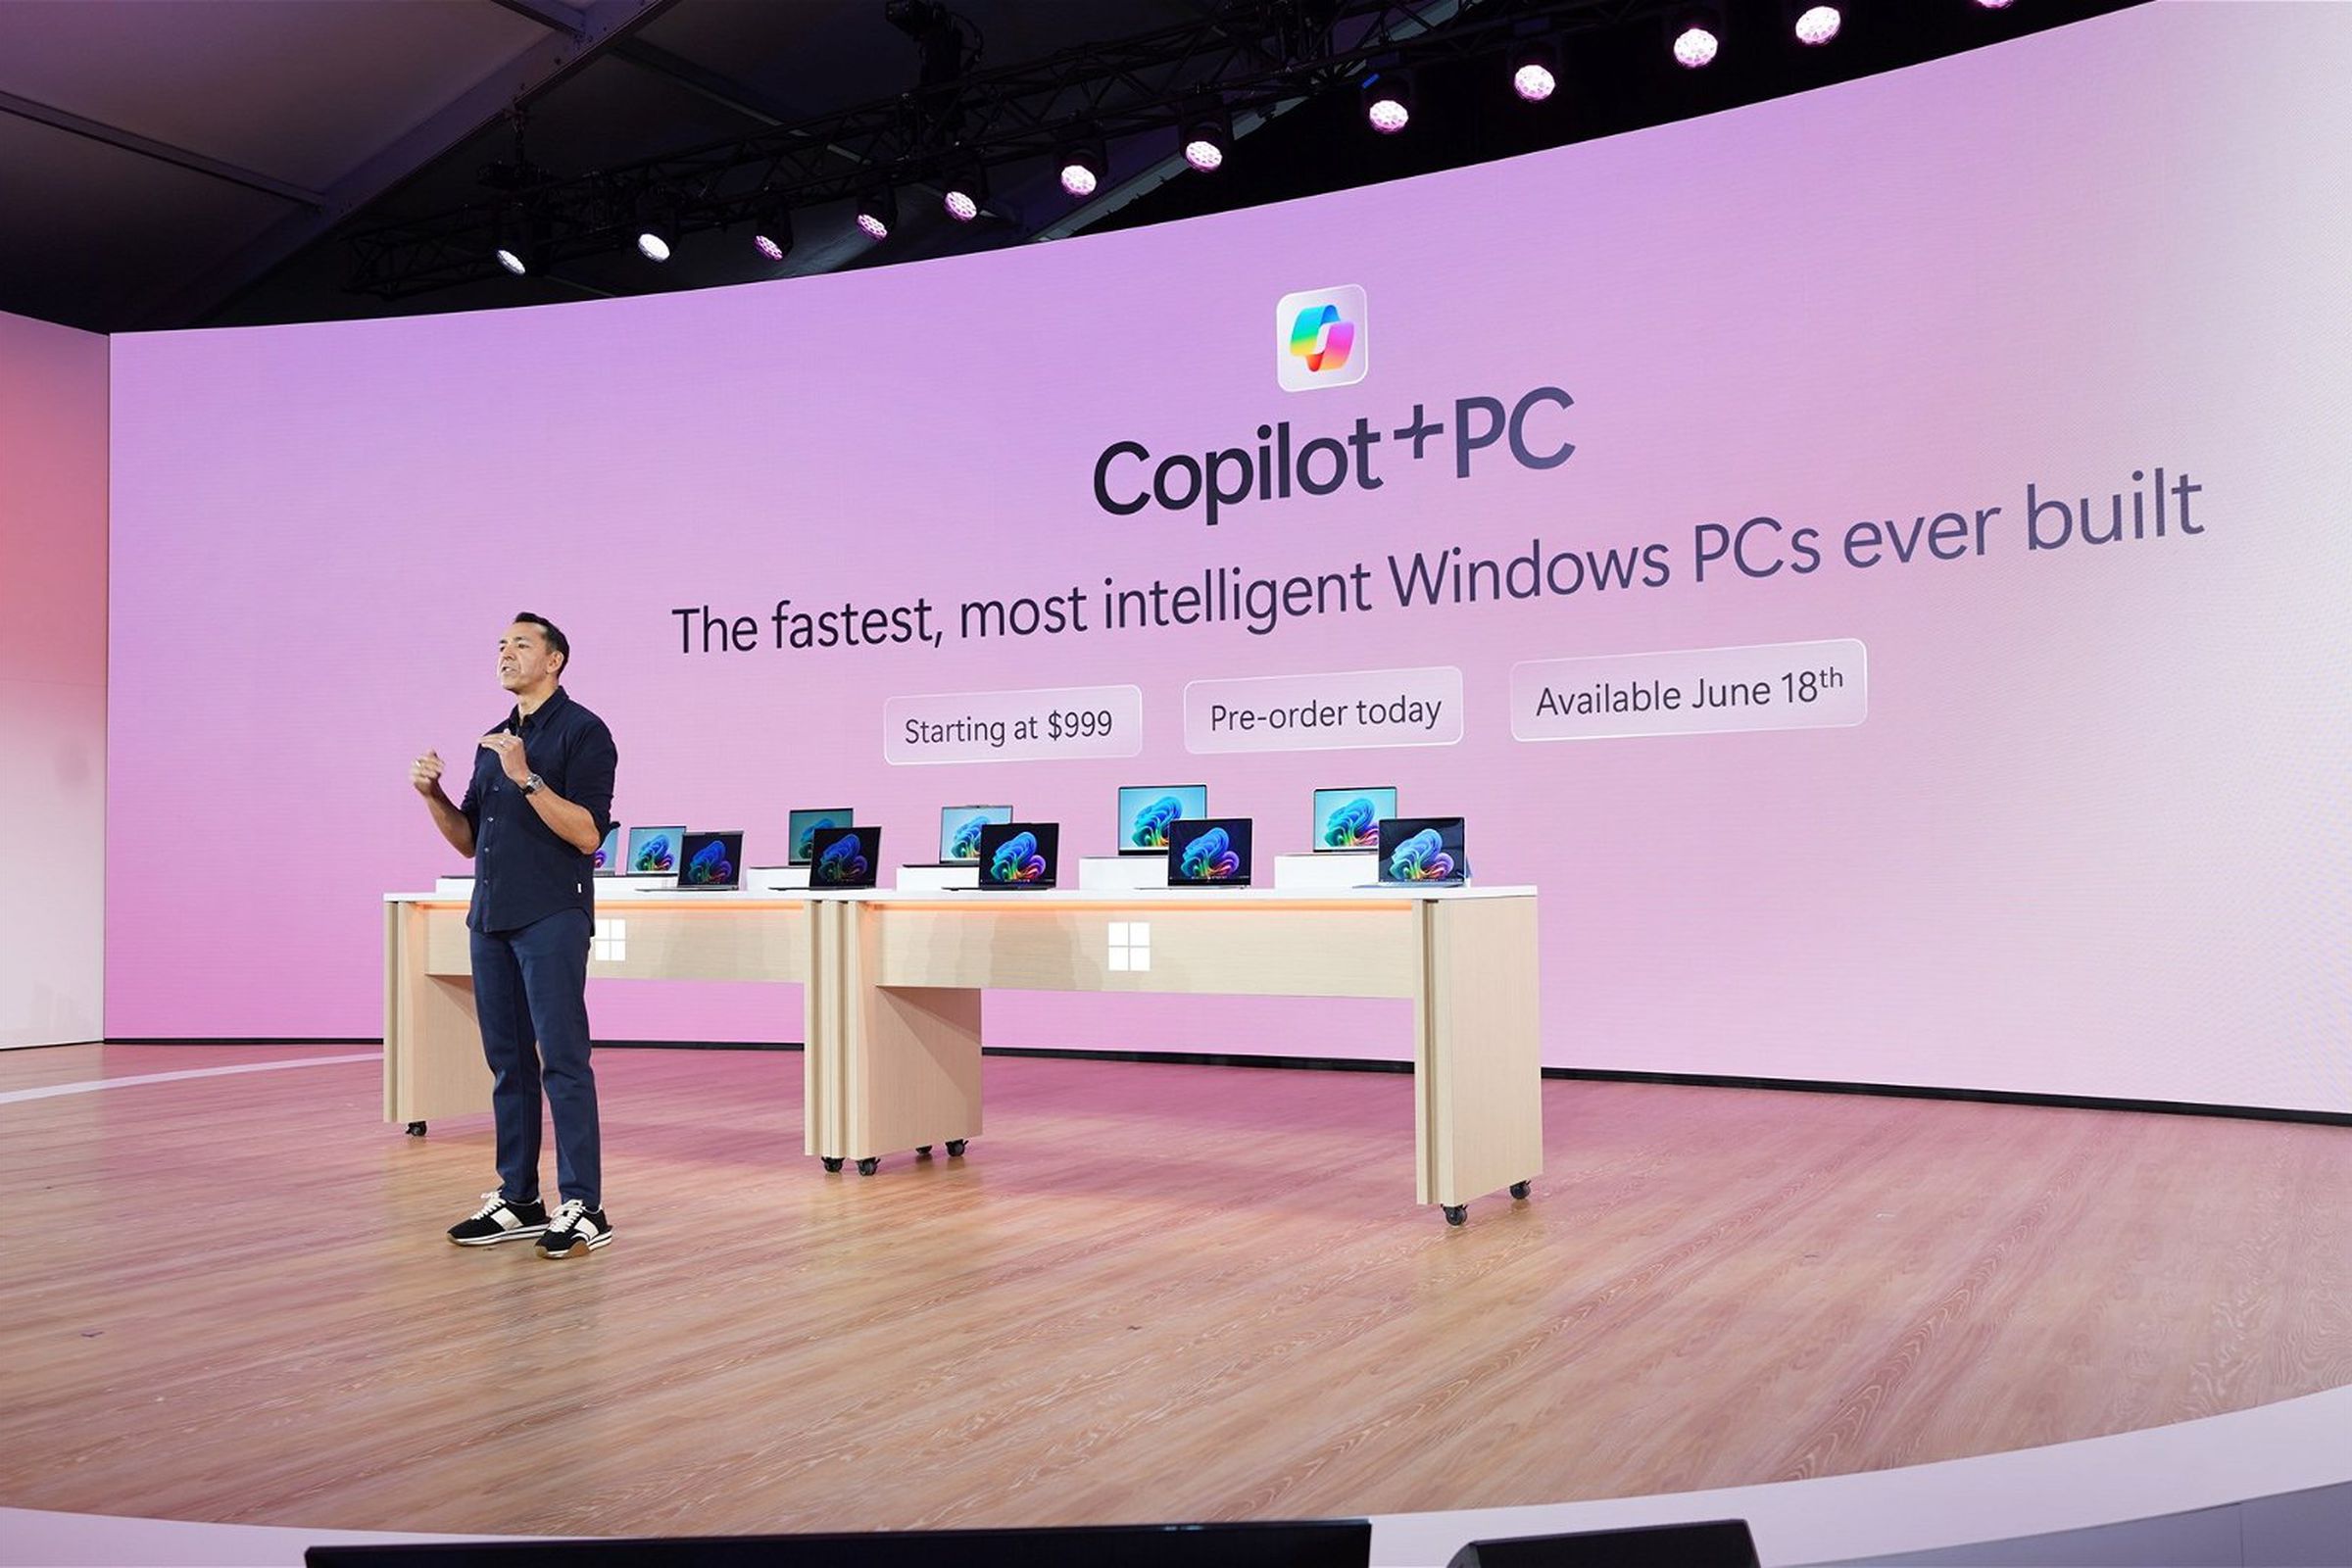 All the Copilot Plus PCs announced at Microsoft’s Surface event